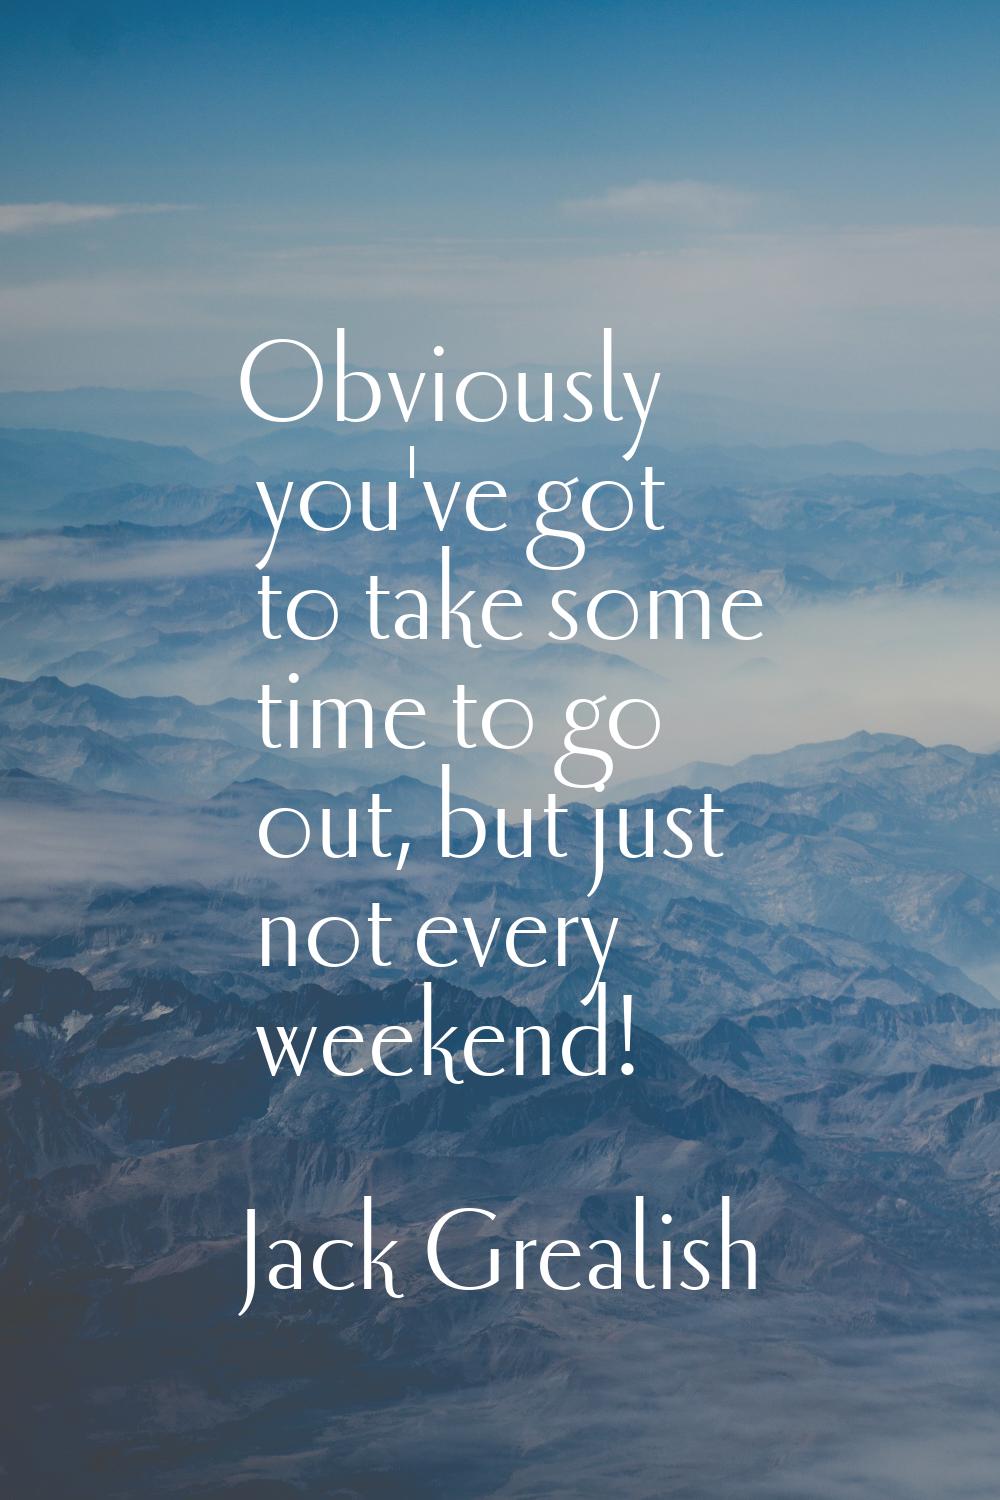 Obviously you've got to take some time to go out, but just not every weekend!